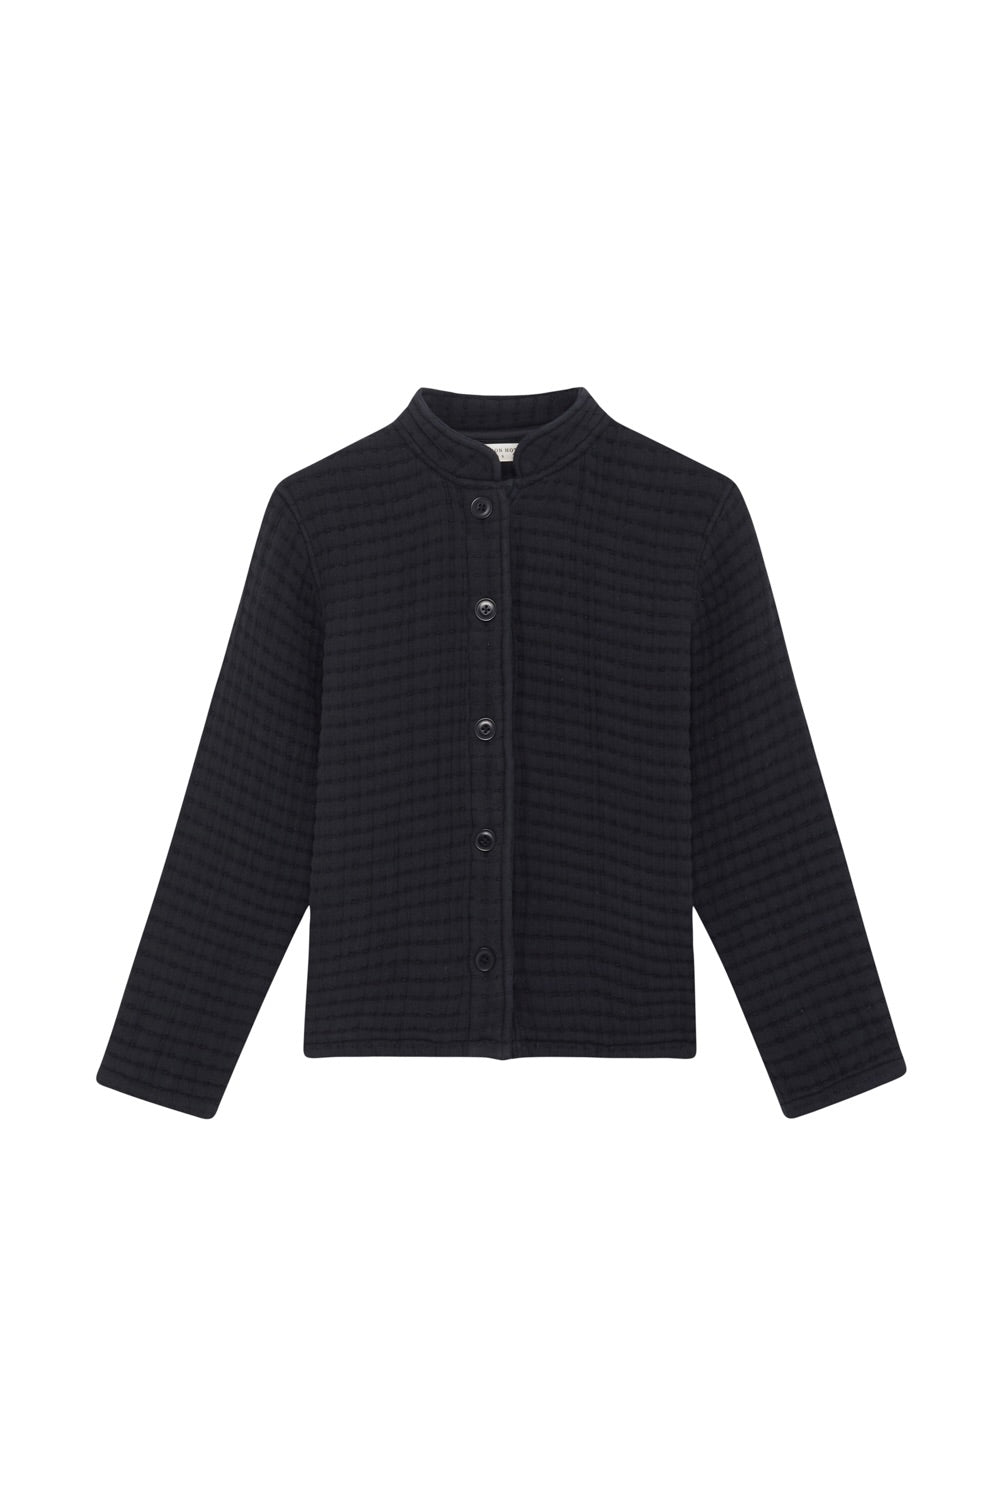 Maison Hotel Jacket Sophie Charcoal - Quilted